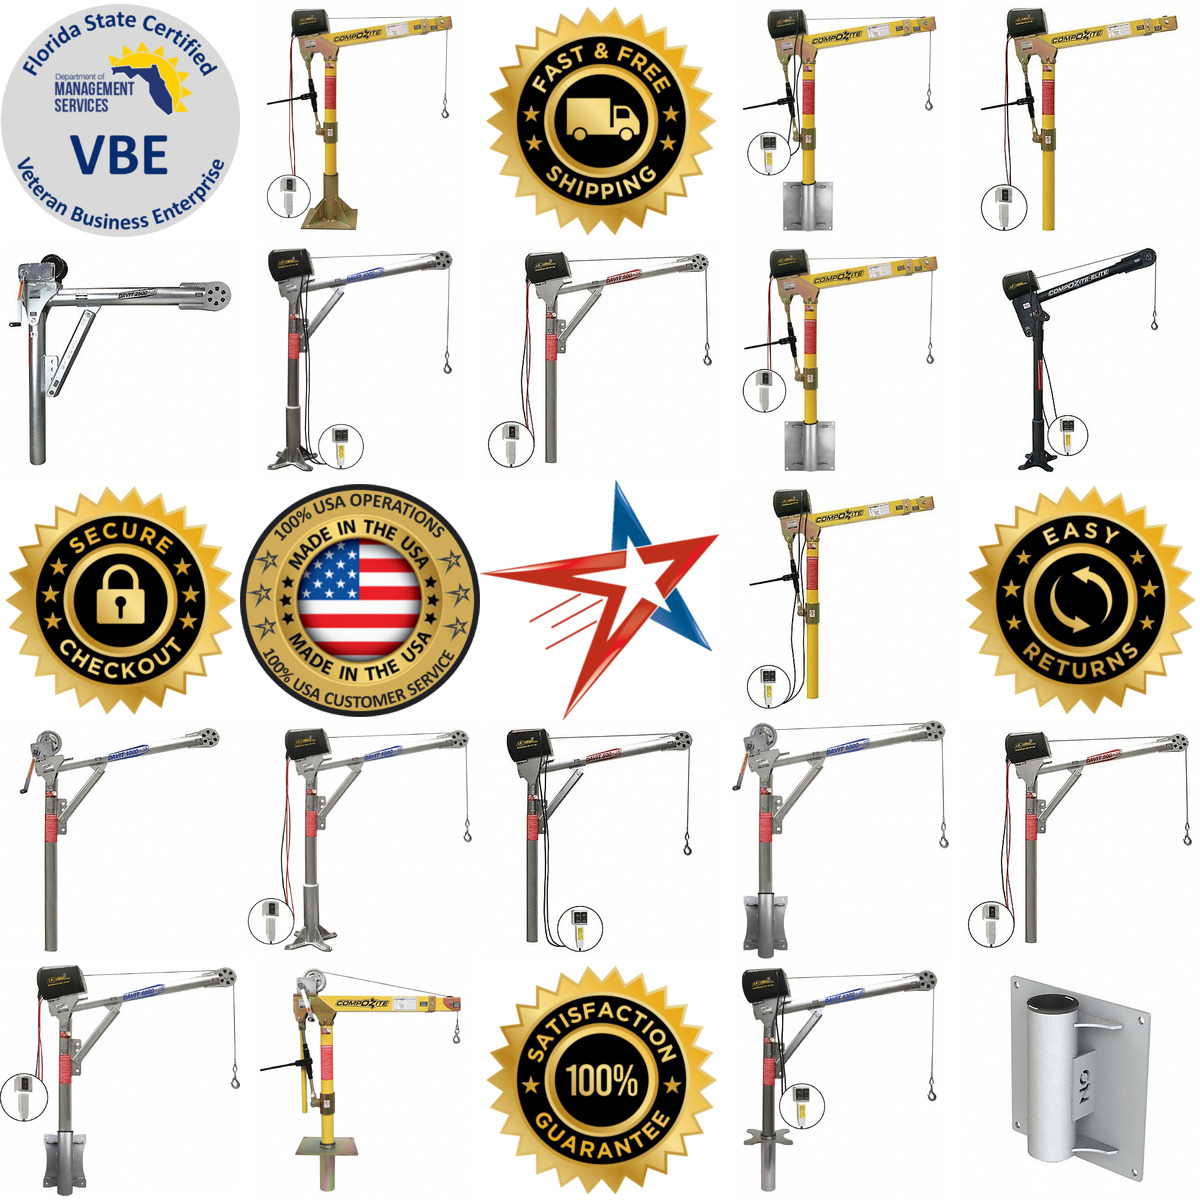 A selection of Davit Cranes products on GoVets